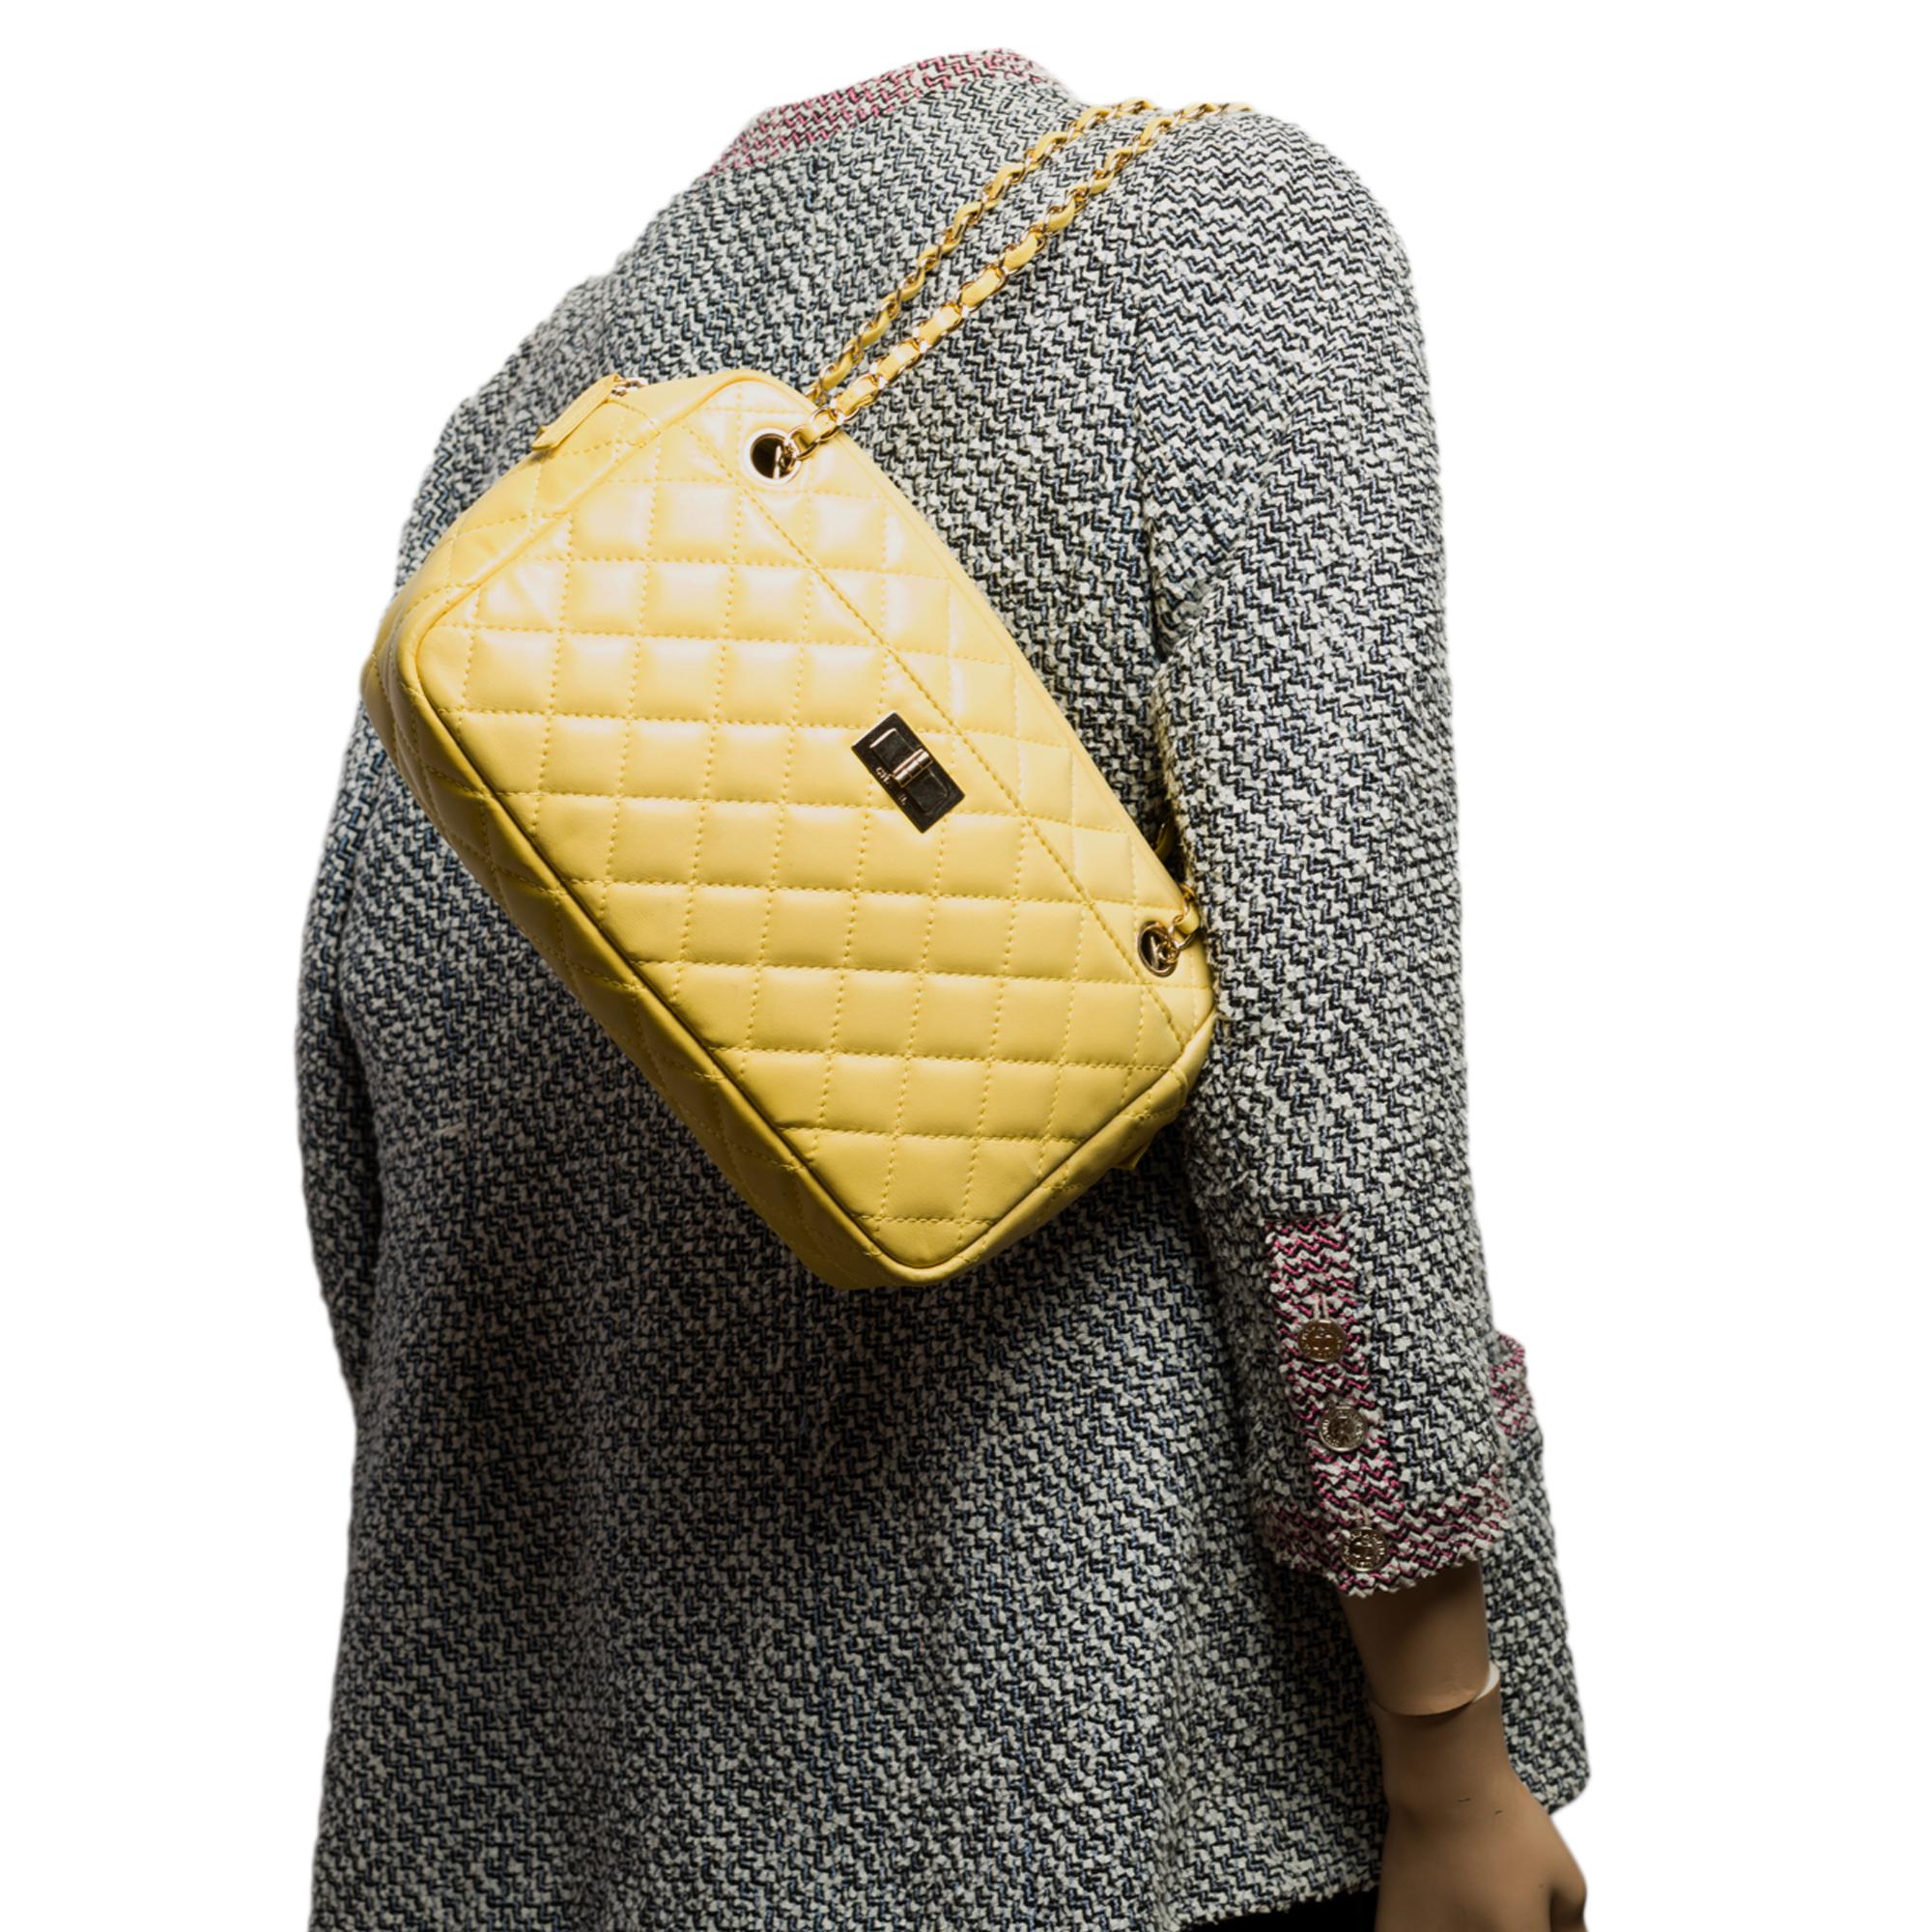 Amazing Chanel Camera shoulder bag in Yellow lime quilted leather, GHW 4